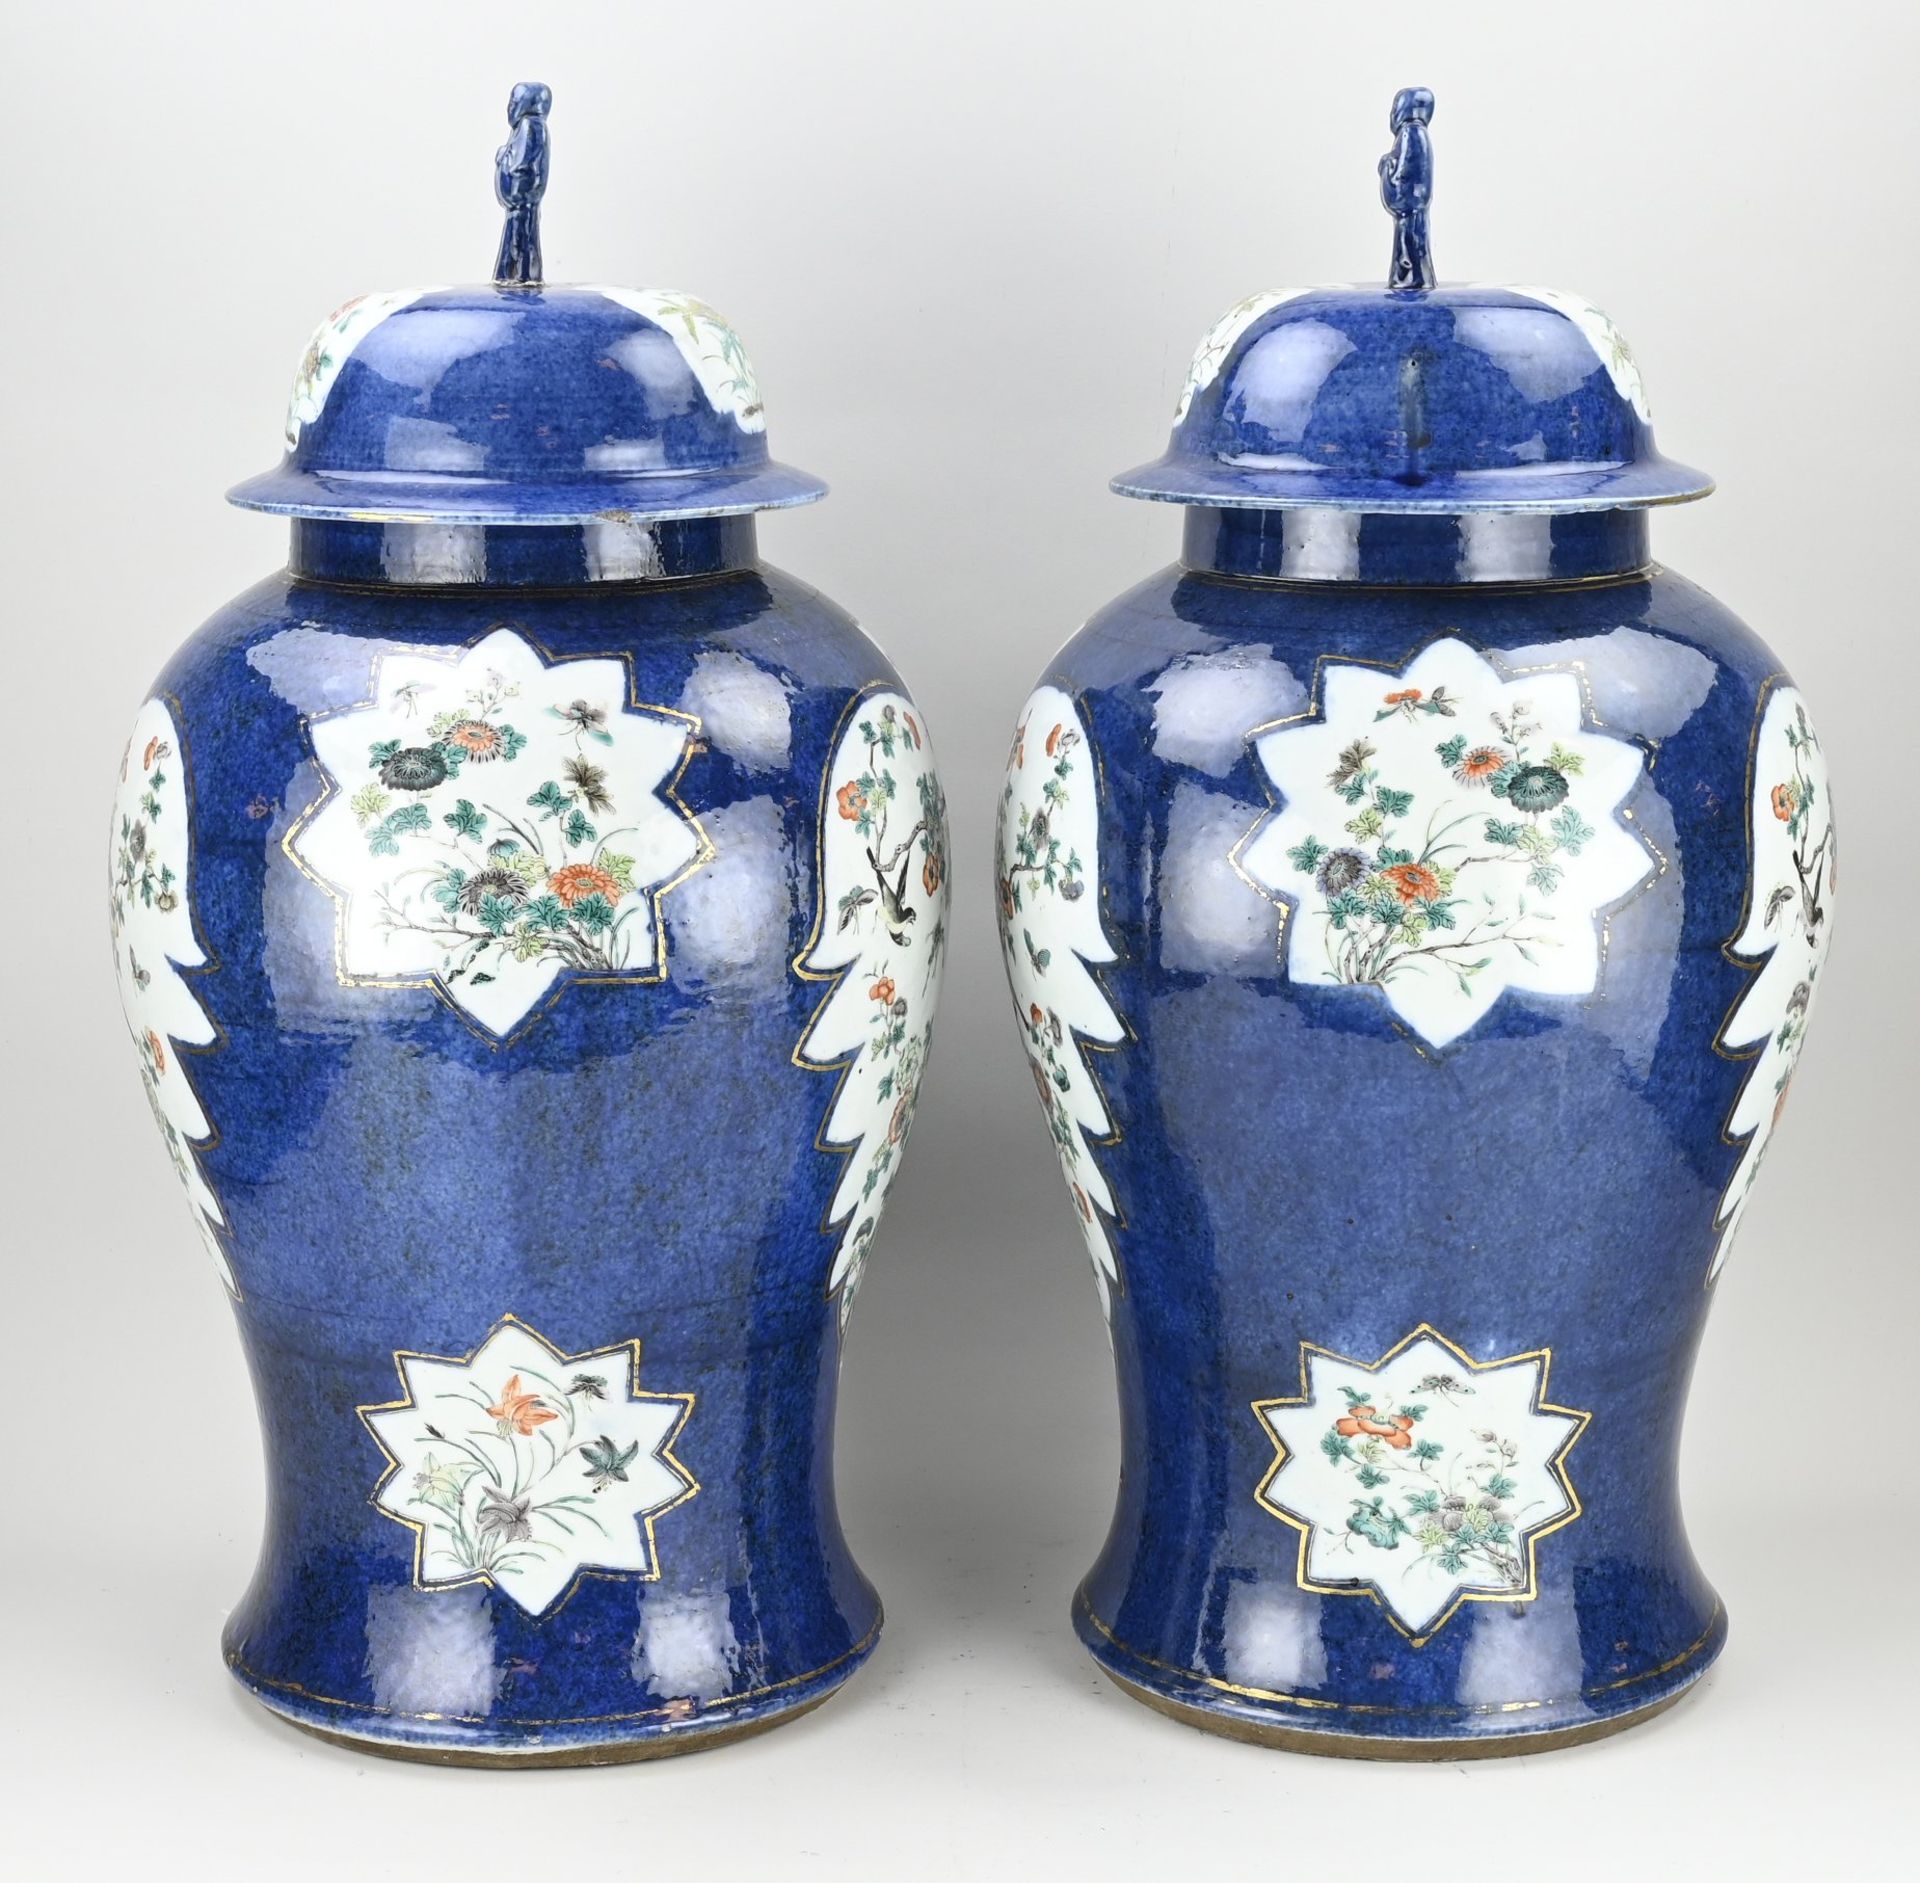 Two capital 18th century Chinese vases, H 70 x Ø 34 cm. - Image 2 of 3